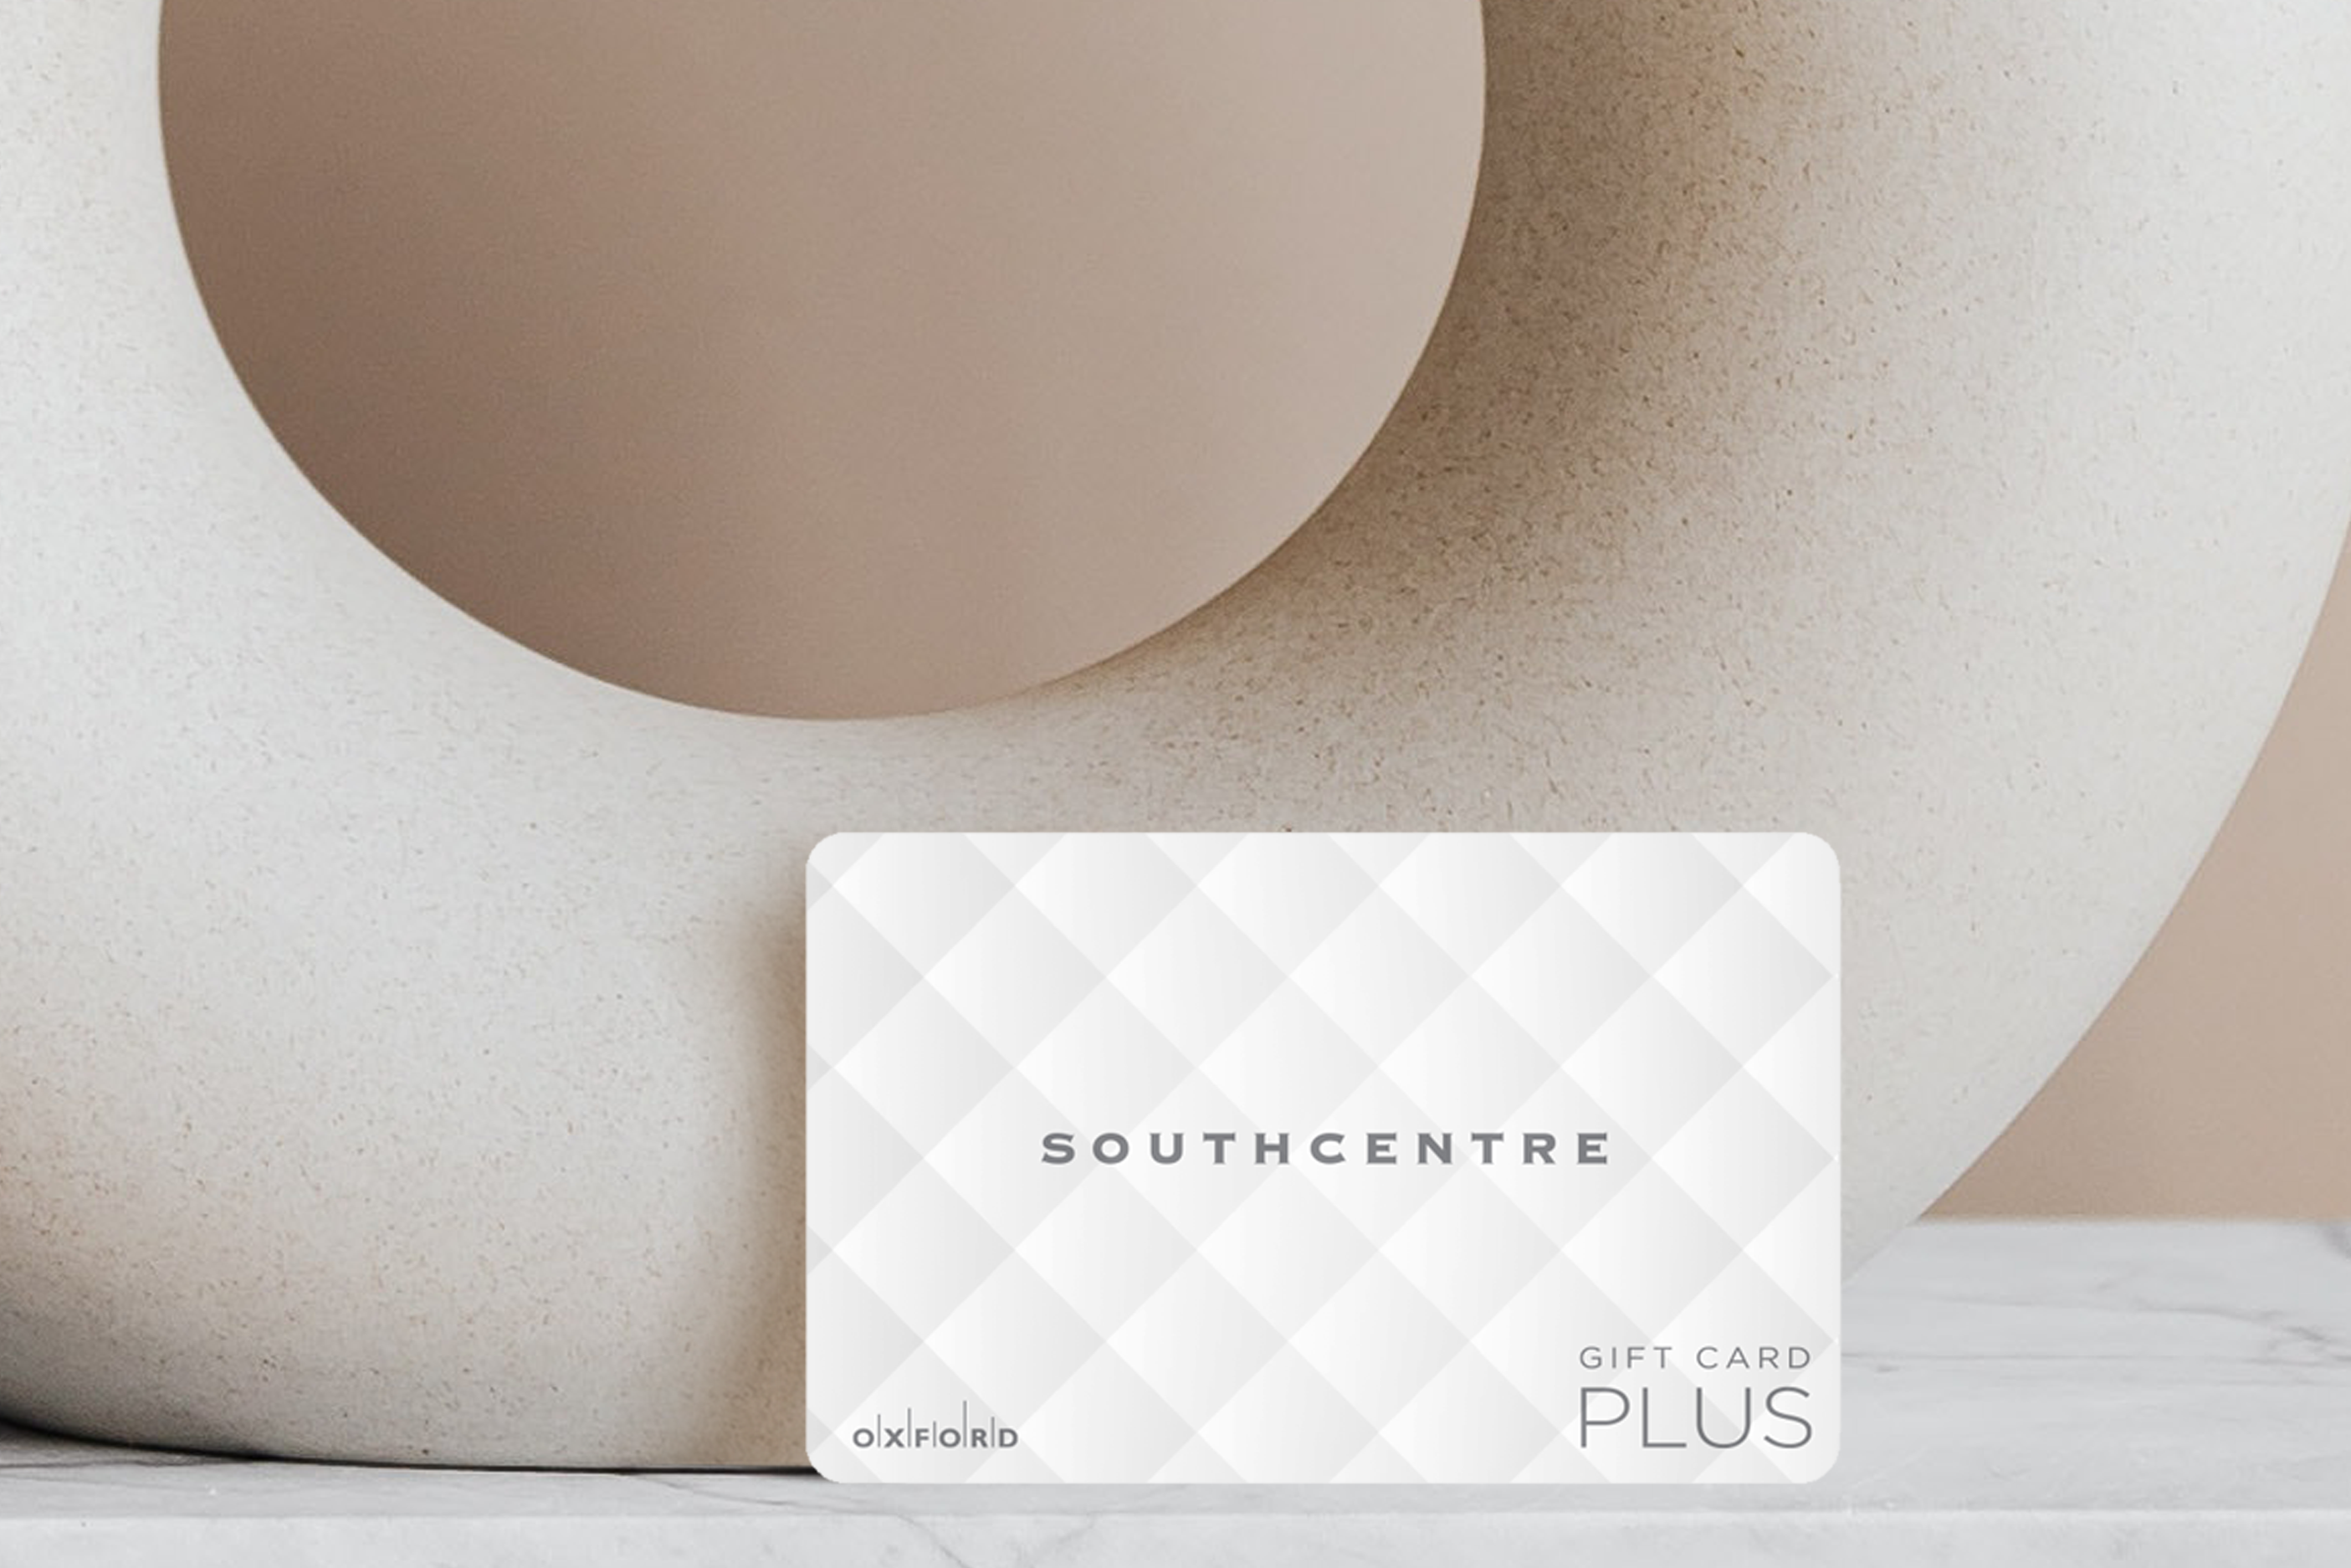 Southcentre white quilted gift card leaning against beige circular vase with a taupe wall.